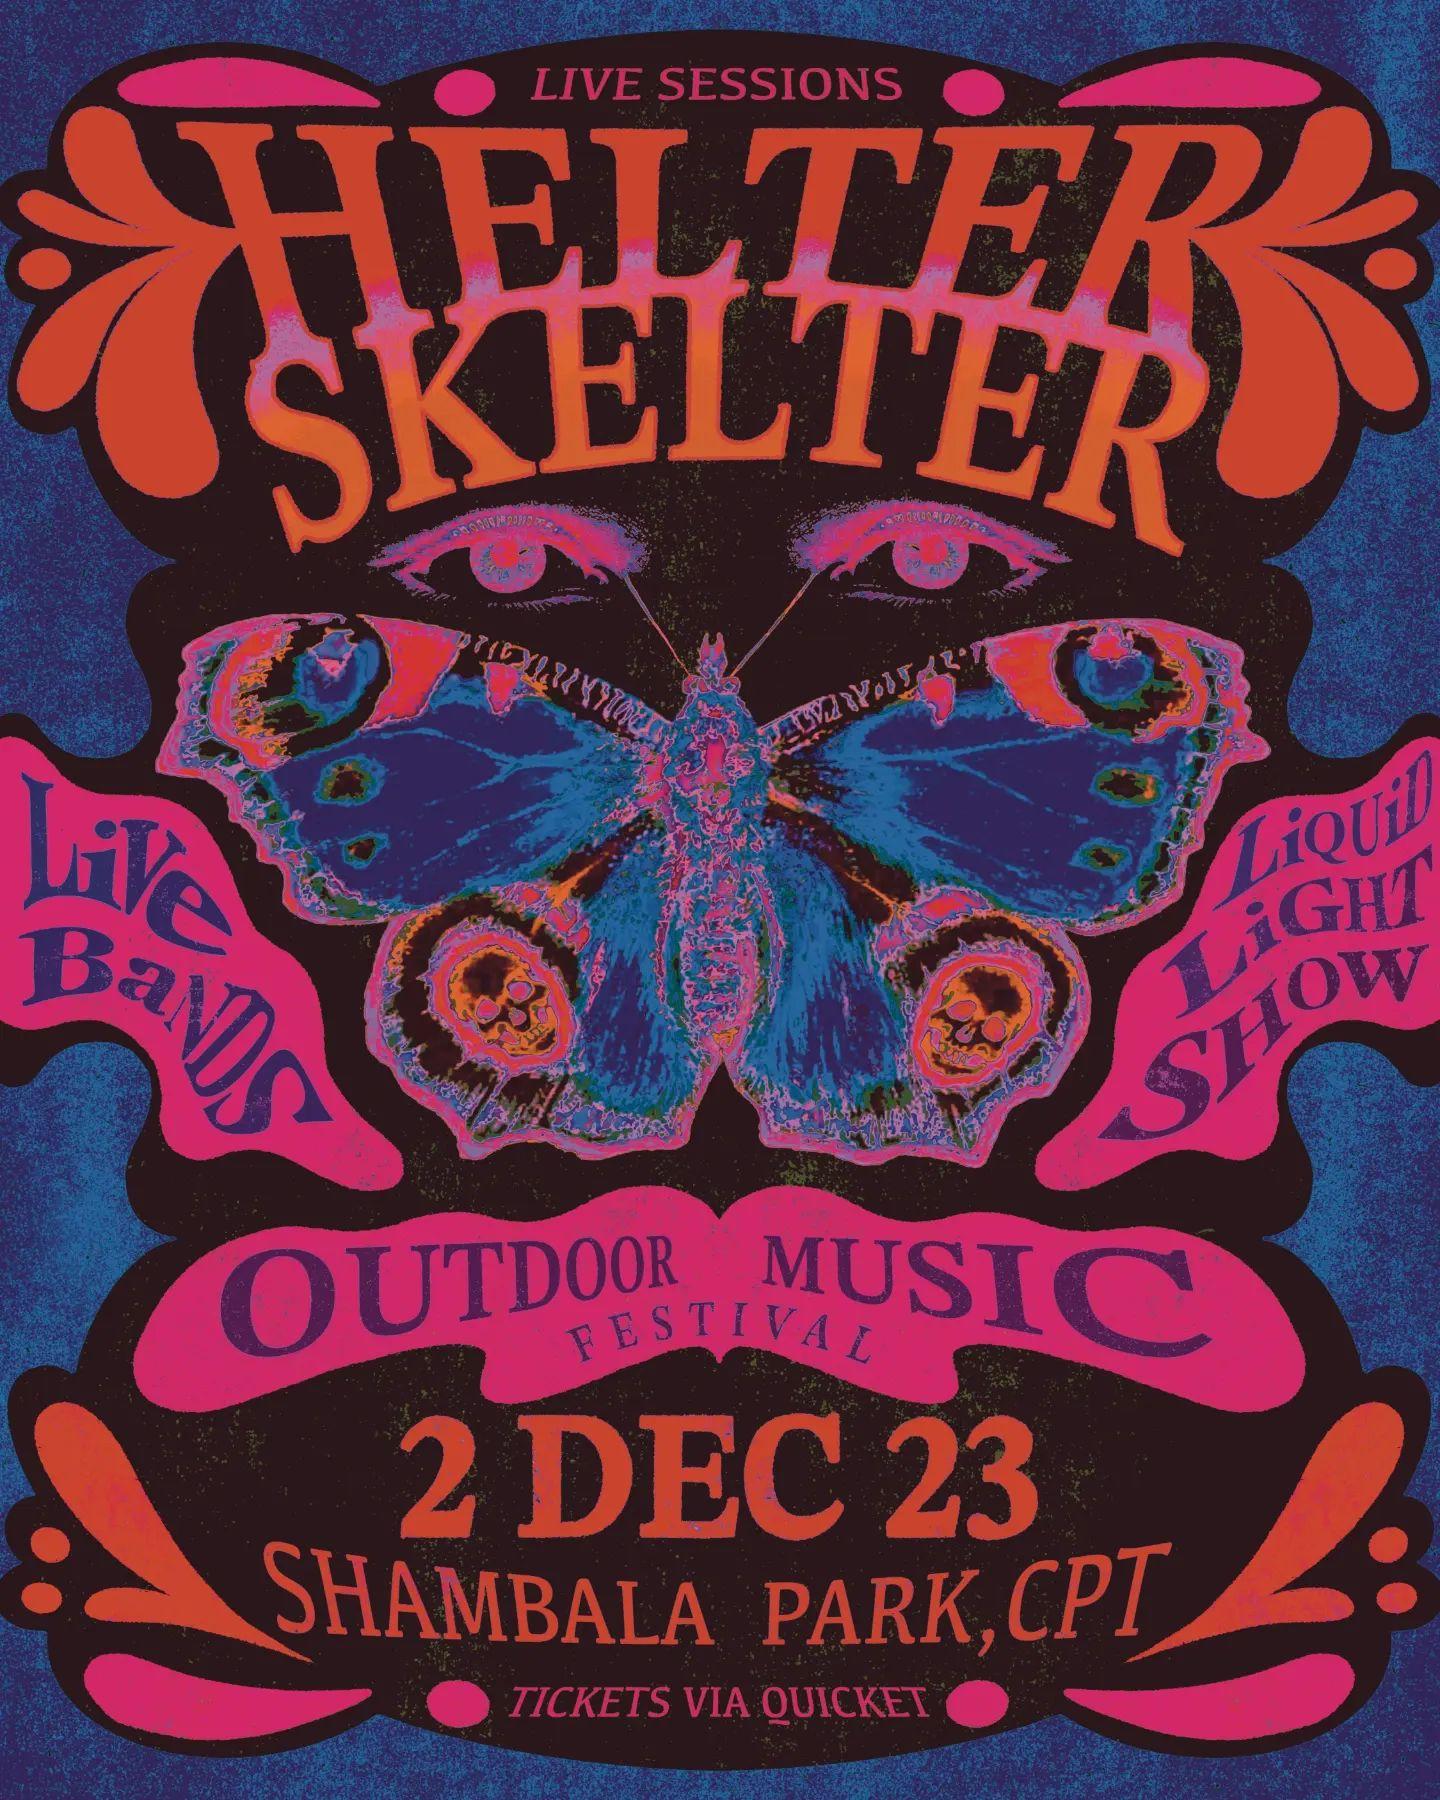 🌈 HELTER SKELTER Outdoor Music Day-Fest Returns this December! 🎶

Your eyes aren't playing tricks on you – it's back! Get ready to kick-start the jol season with an electrifying outdoor music day-fest featuring:

🎸 8 of Cape Town’s hottest alternative and rock ‘n roll bands
🎧 DJ’s
🎨 Visual stimuli by The Glue Factory

BLIND BIRD tickets are available NOW at just R100 via Quicket (link in bio), but act fast because this special offer only lasts for 10 DAYS! 🔥

For those who want to make a weekend of it, General Camping tickets are available at an additional cost on Quicket, and if you need a ride, Shuttle tickets (CPT and back) can be purchased as well. 🏕️🚎

Stay tuned as we unveil the epic lineup over the next few weeks – trust us, there are some incredible surprises in store! 😎

Don't wait any longer – go grab those tickets and join us for a day and night of non-stop music and good times. See you on the other side! 🤙

Poster design by the talented @ruk_n_roll.gfx and @adventures.of.kabous ❤️

#HelterSkelterFest #LiveMusic #CapeTownEvents #MusicFestival #OutdoorEvent #RockNRoll #BuyTickets #LiveEvents #PartyTime